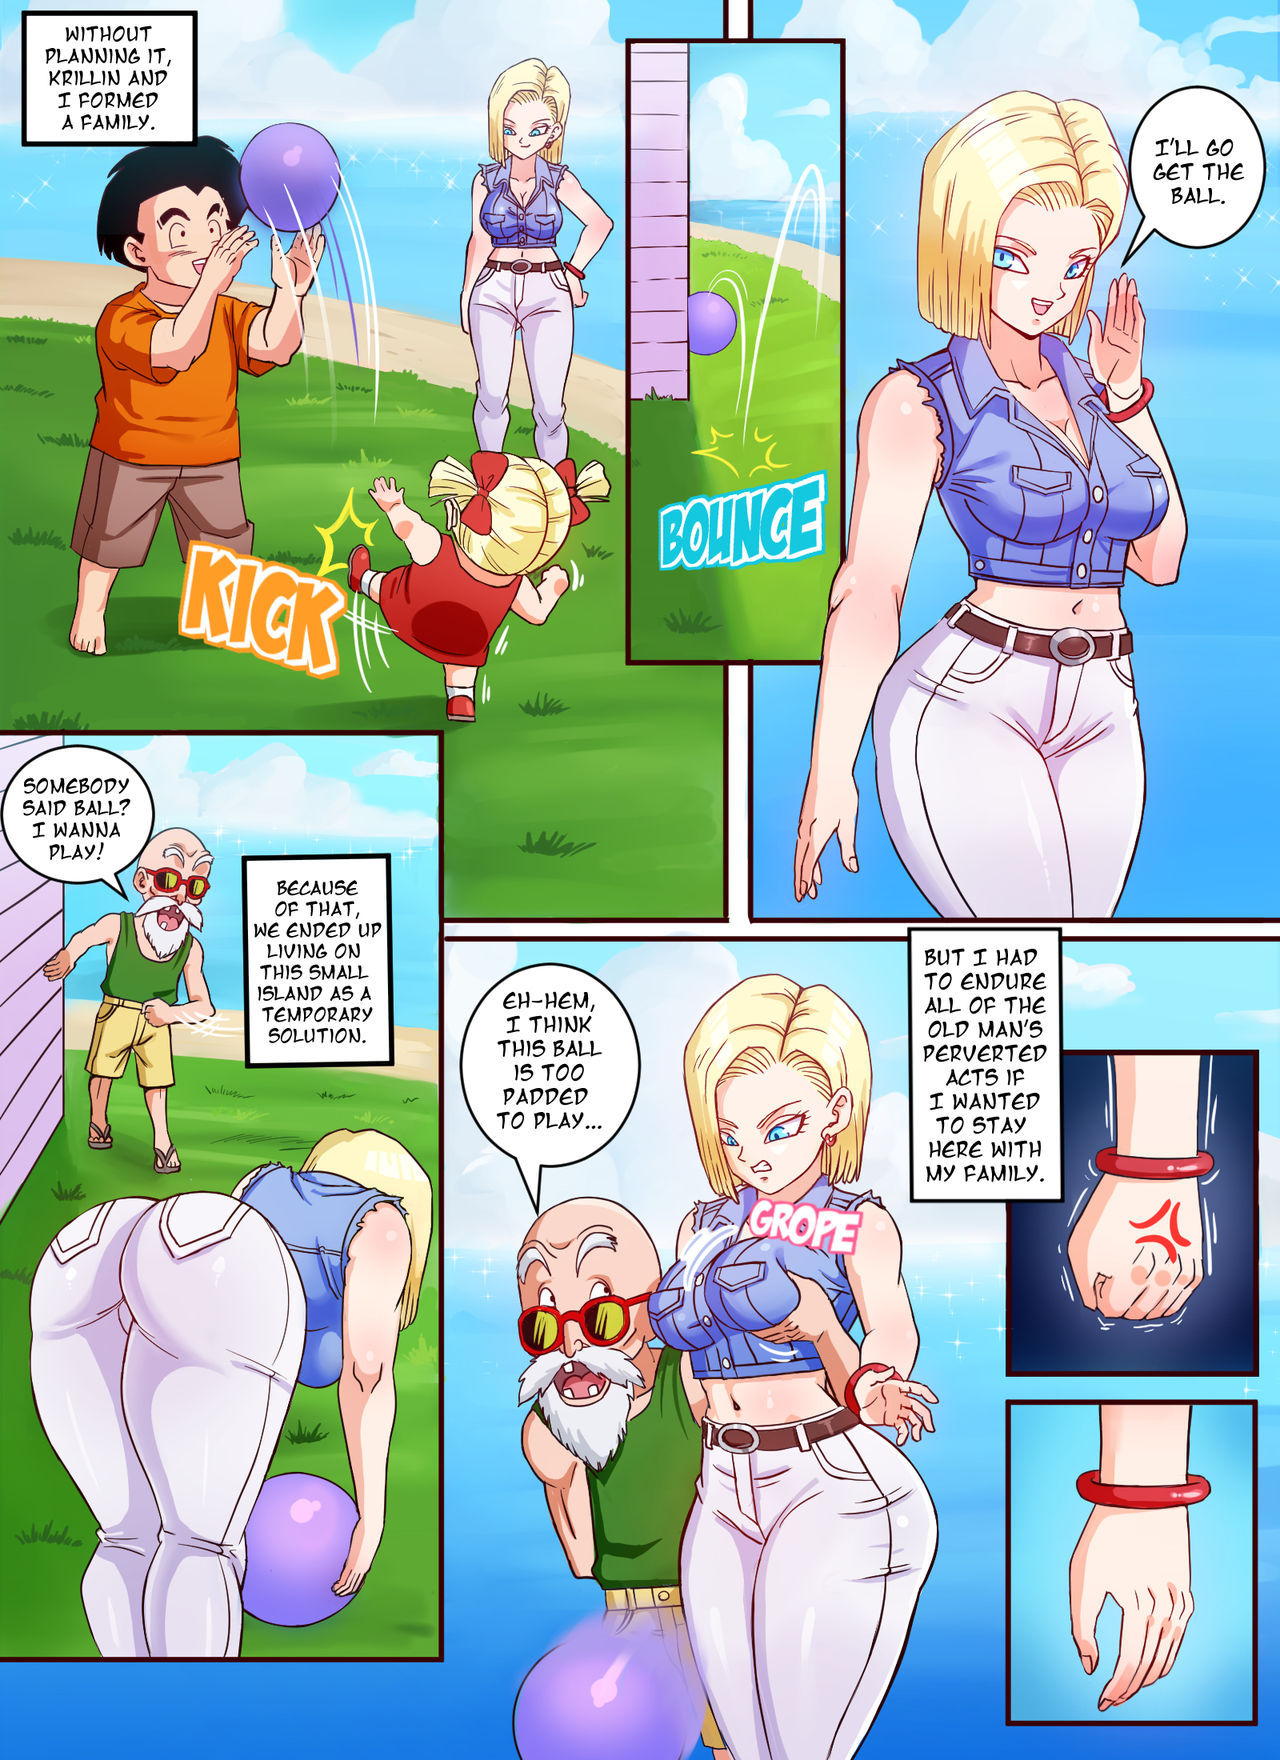 Android 18 and Master Roshi - Pink Pawg - KingComiX.com